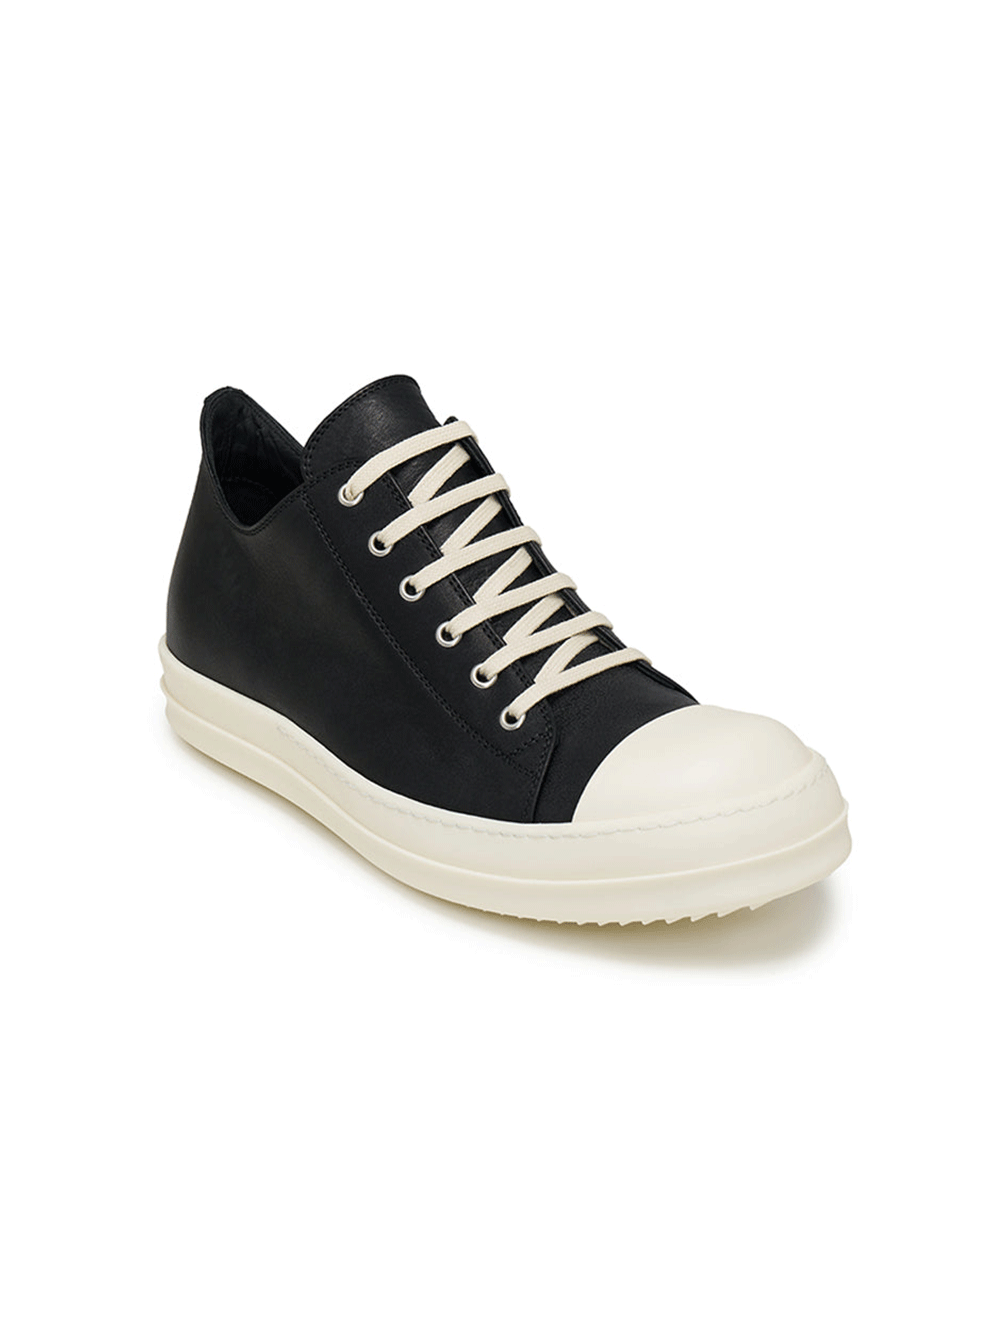 Rick-Owens-Low-Sneakers-Washed-Calf-Black-2